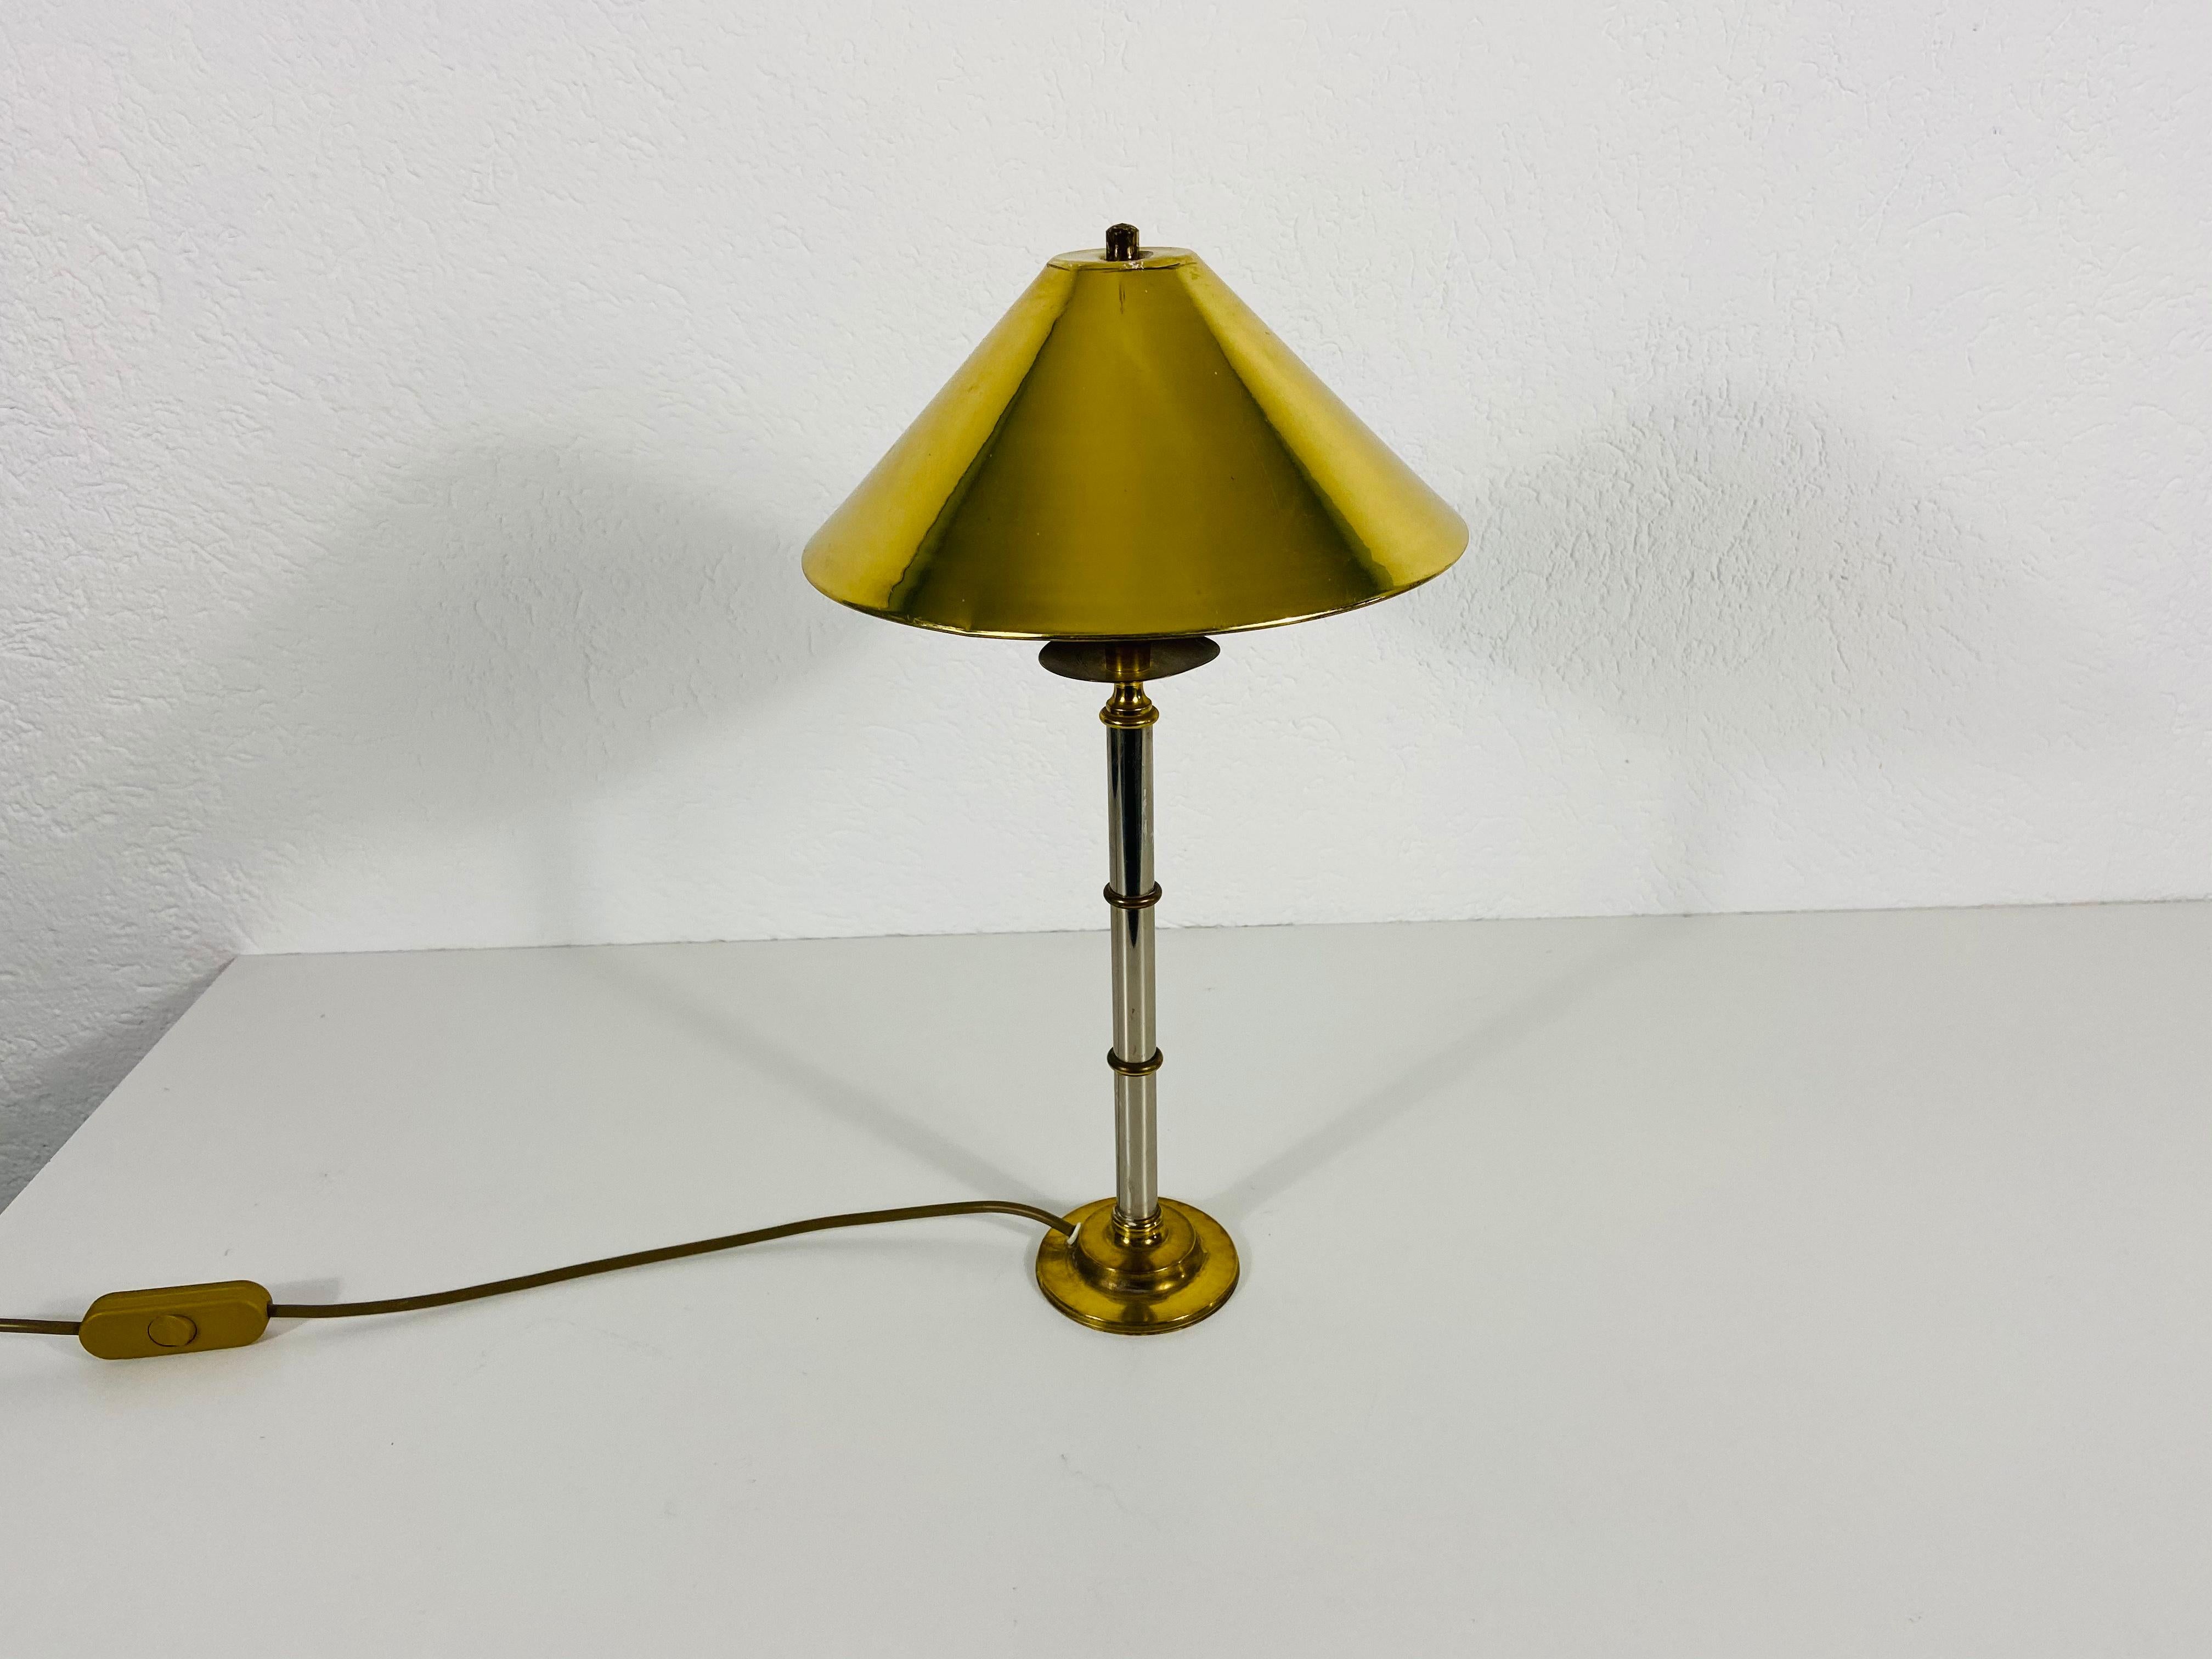 An German table lamp made in the 1960s. Made by solid brass. 

The light requires one E27 light bulb. Good vintage condition.

Free worldwide shipping.